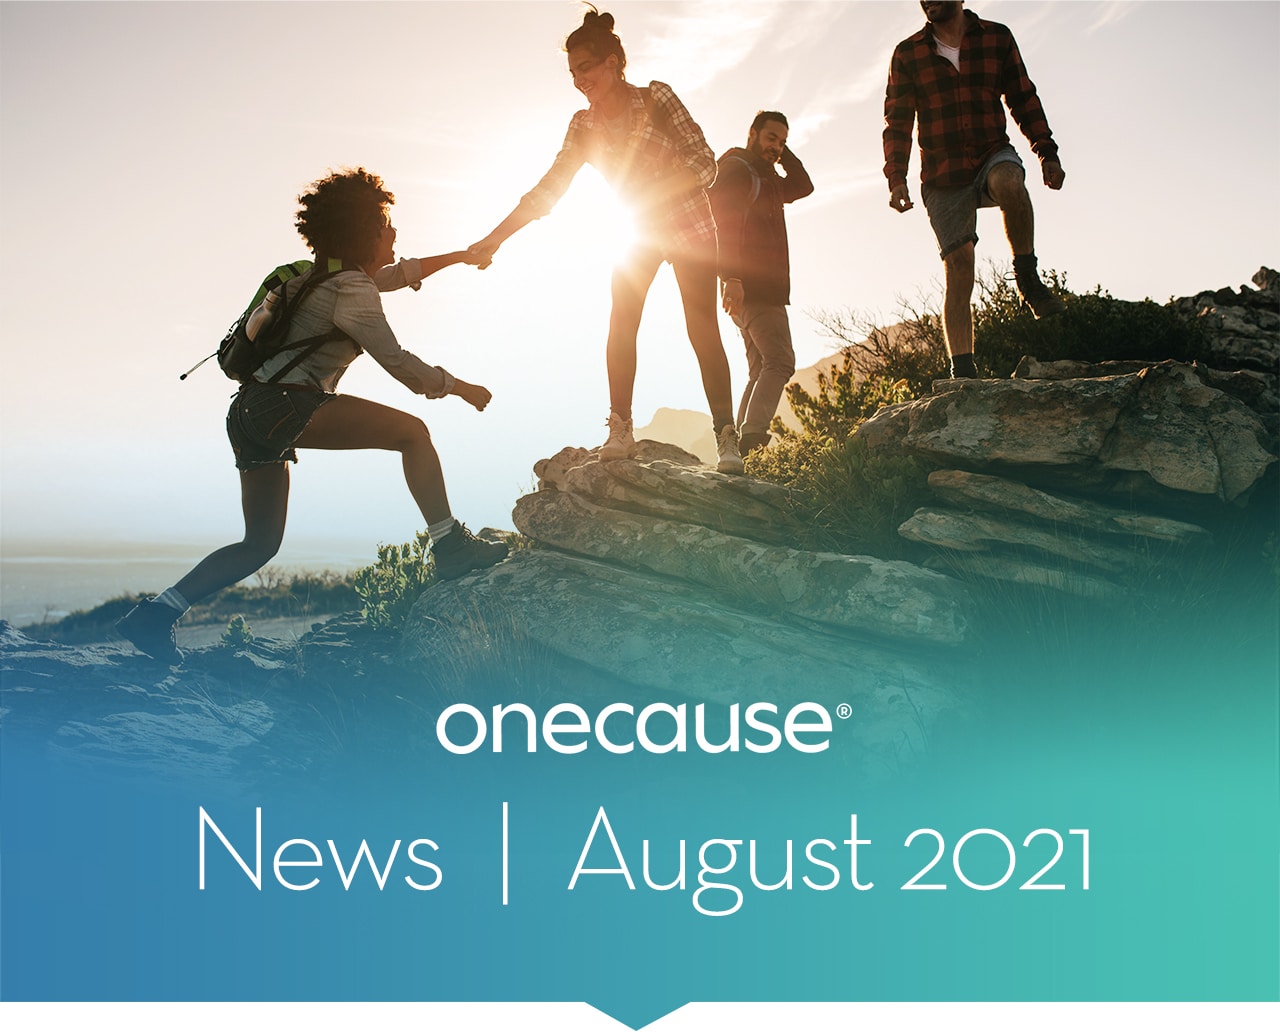 OneCause News August 2021